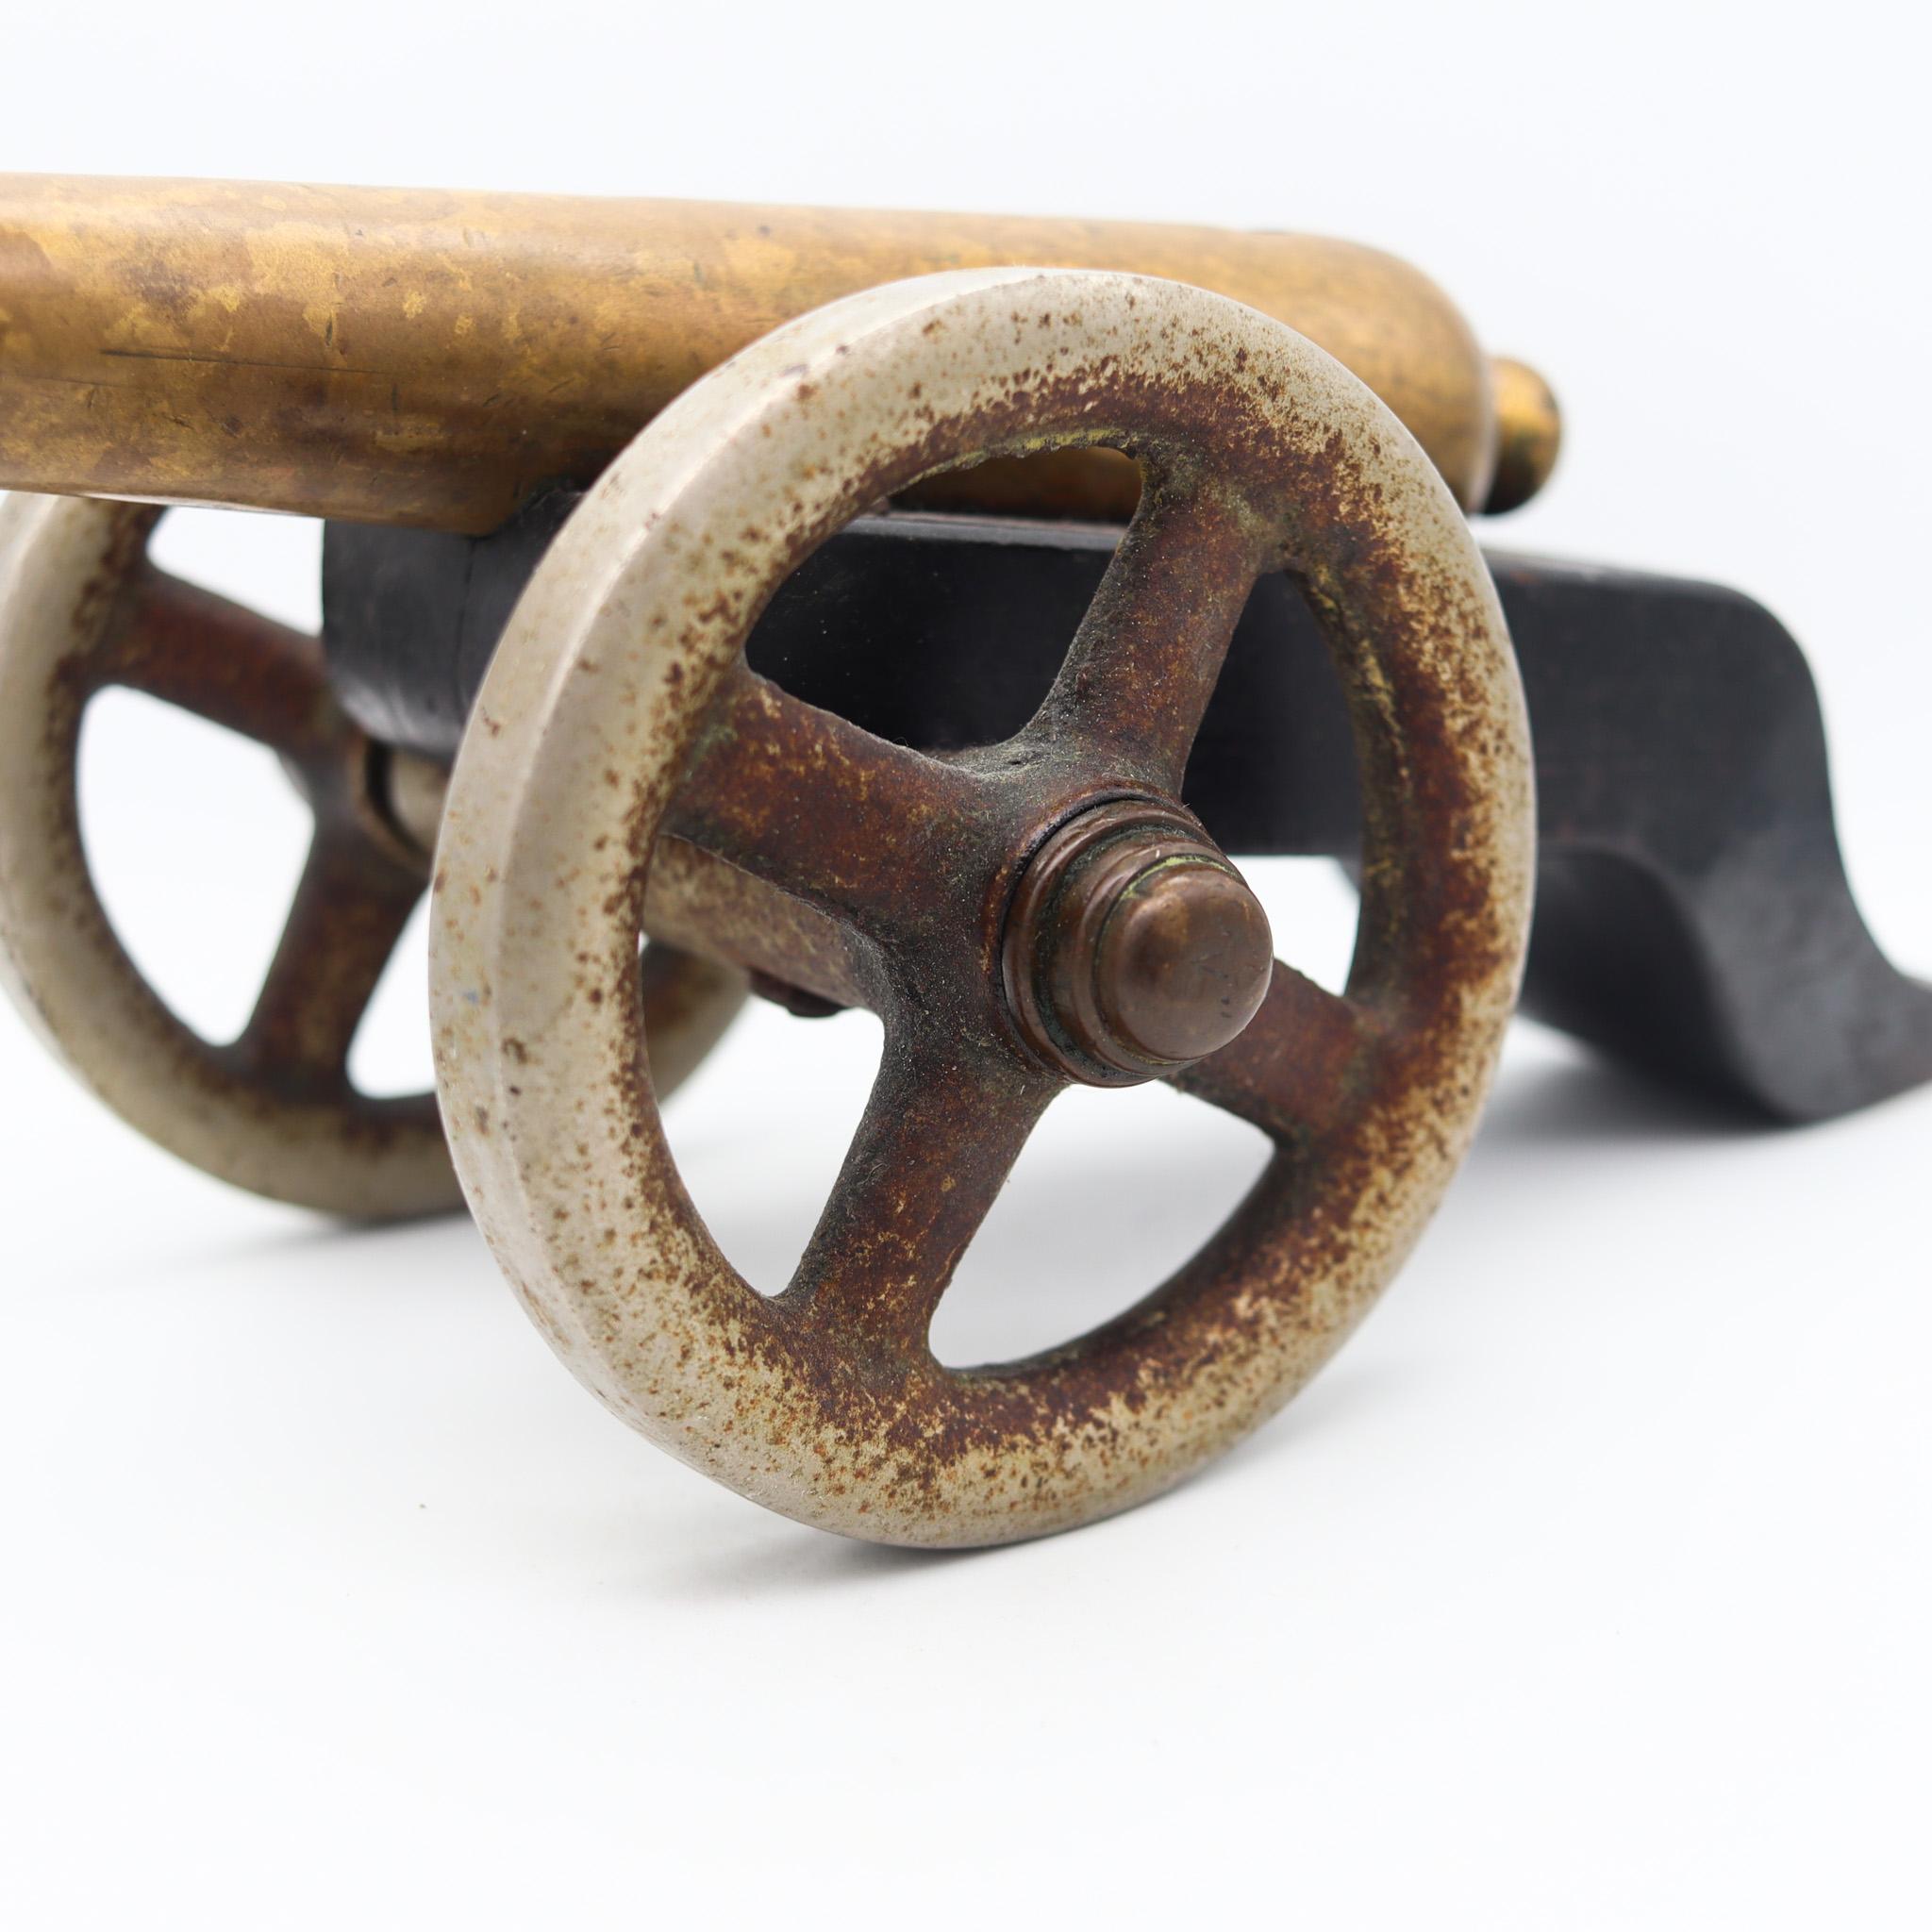 European signal cannon from the late 18th-19th century.

An antique piece made and used in Europe, circa 1800. This kind of small scale toys were made to be used in the navy of some European country, to send firing signals ship to ship. Signal